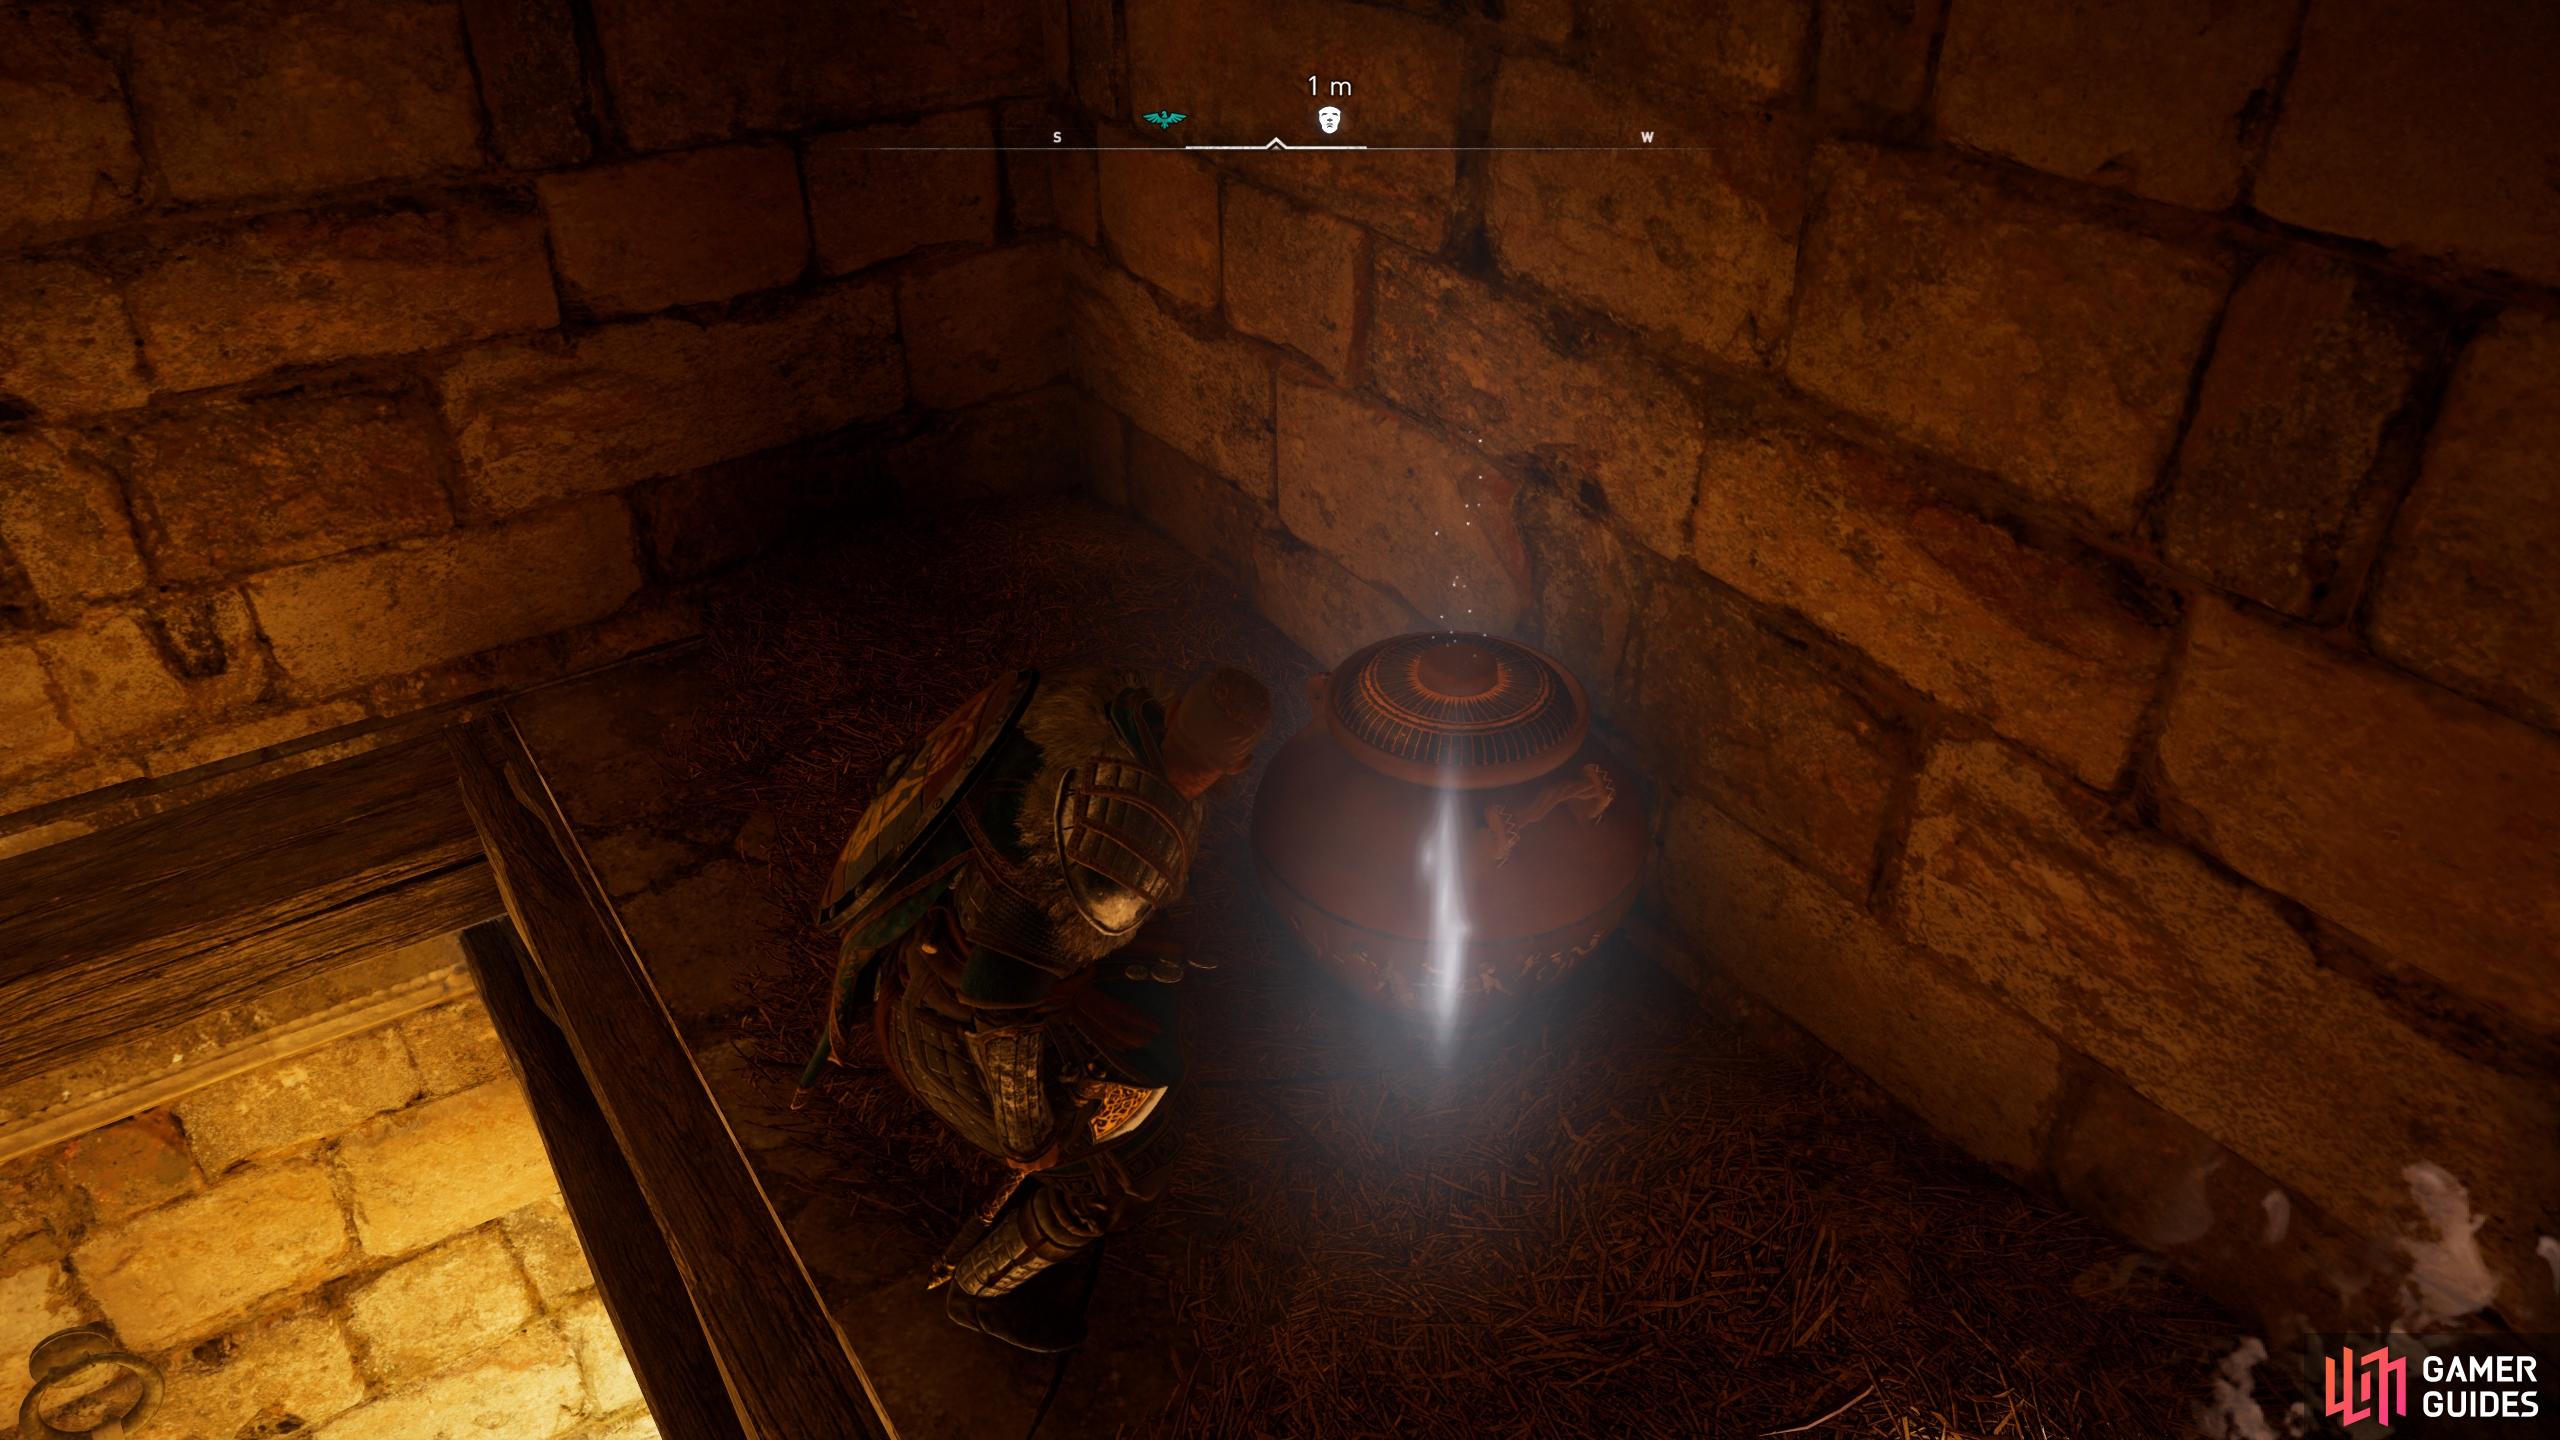 Destroy the pot to reveal the artifact beneath it.